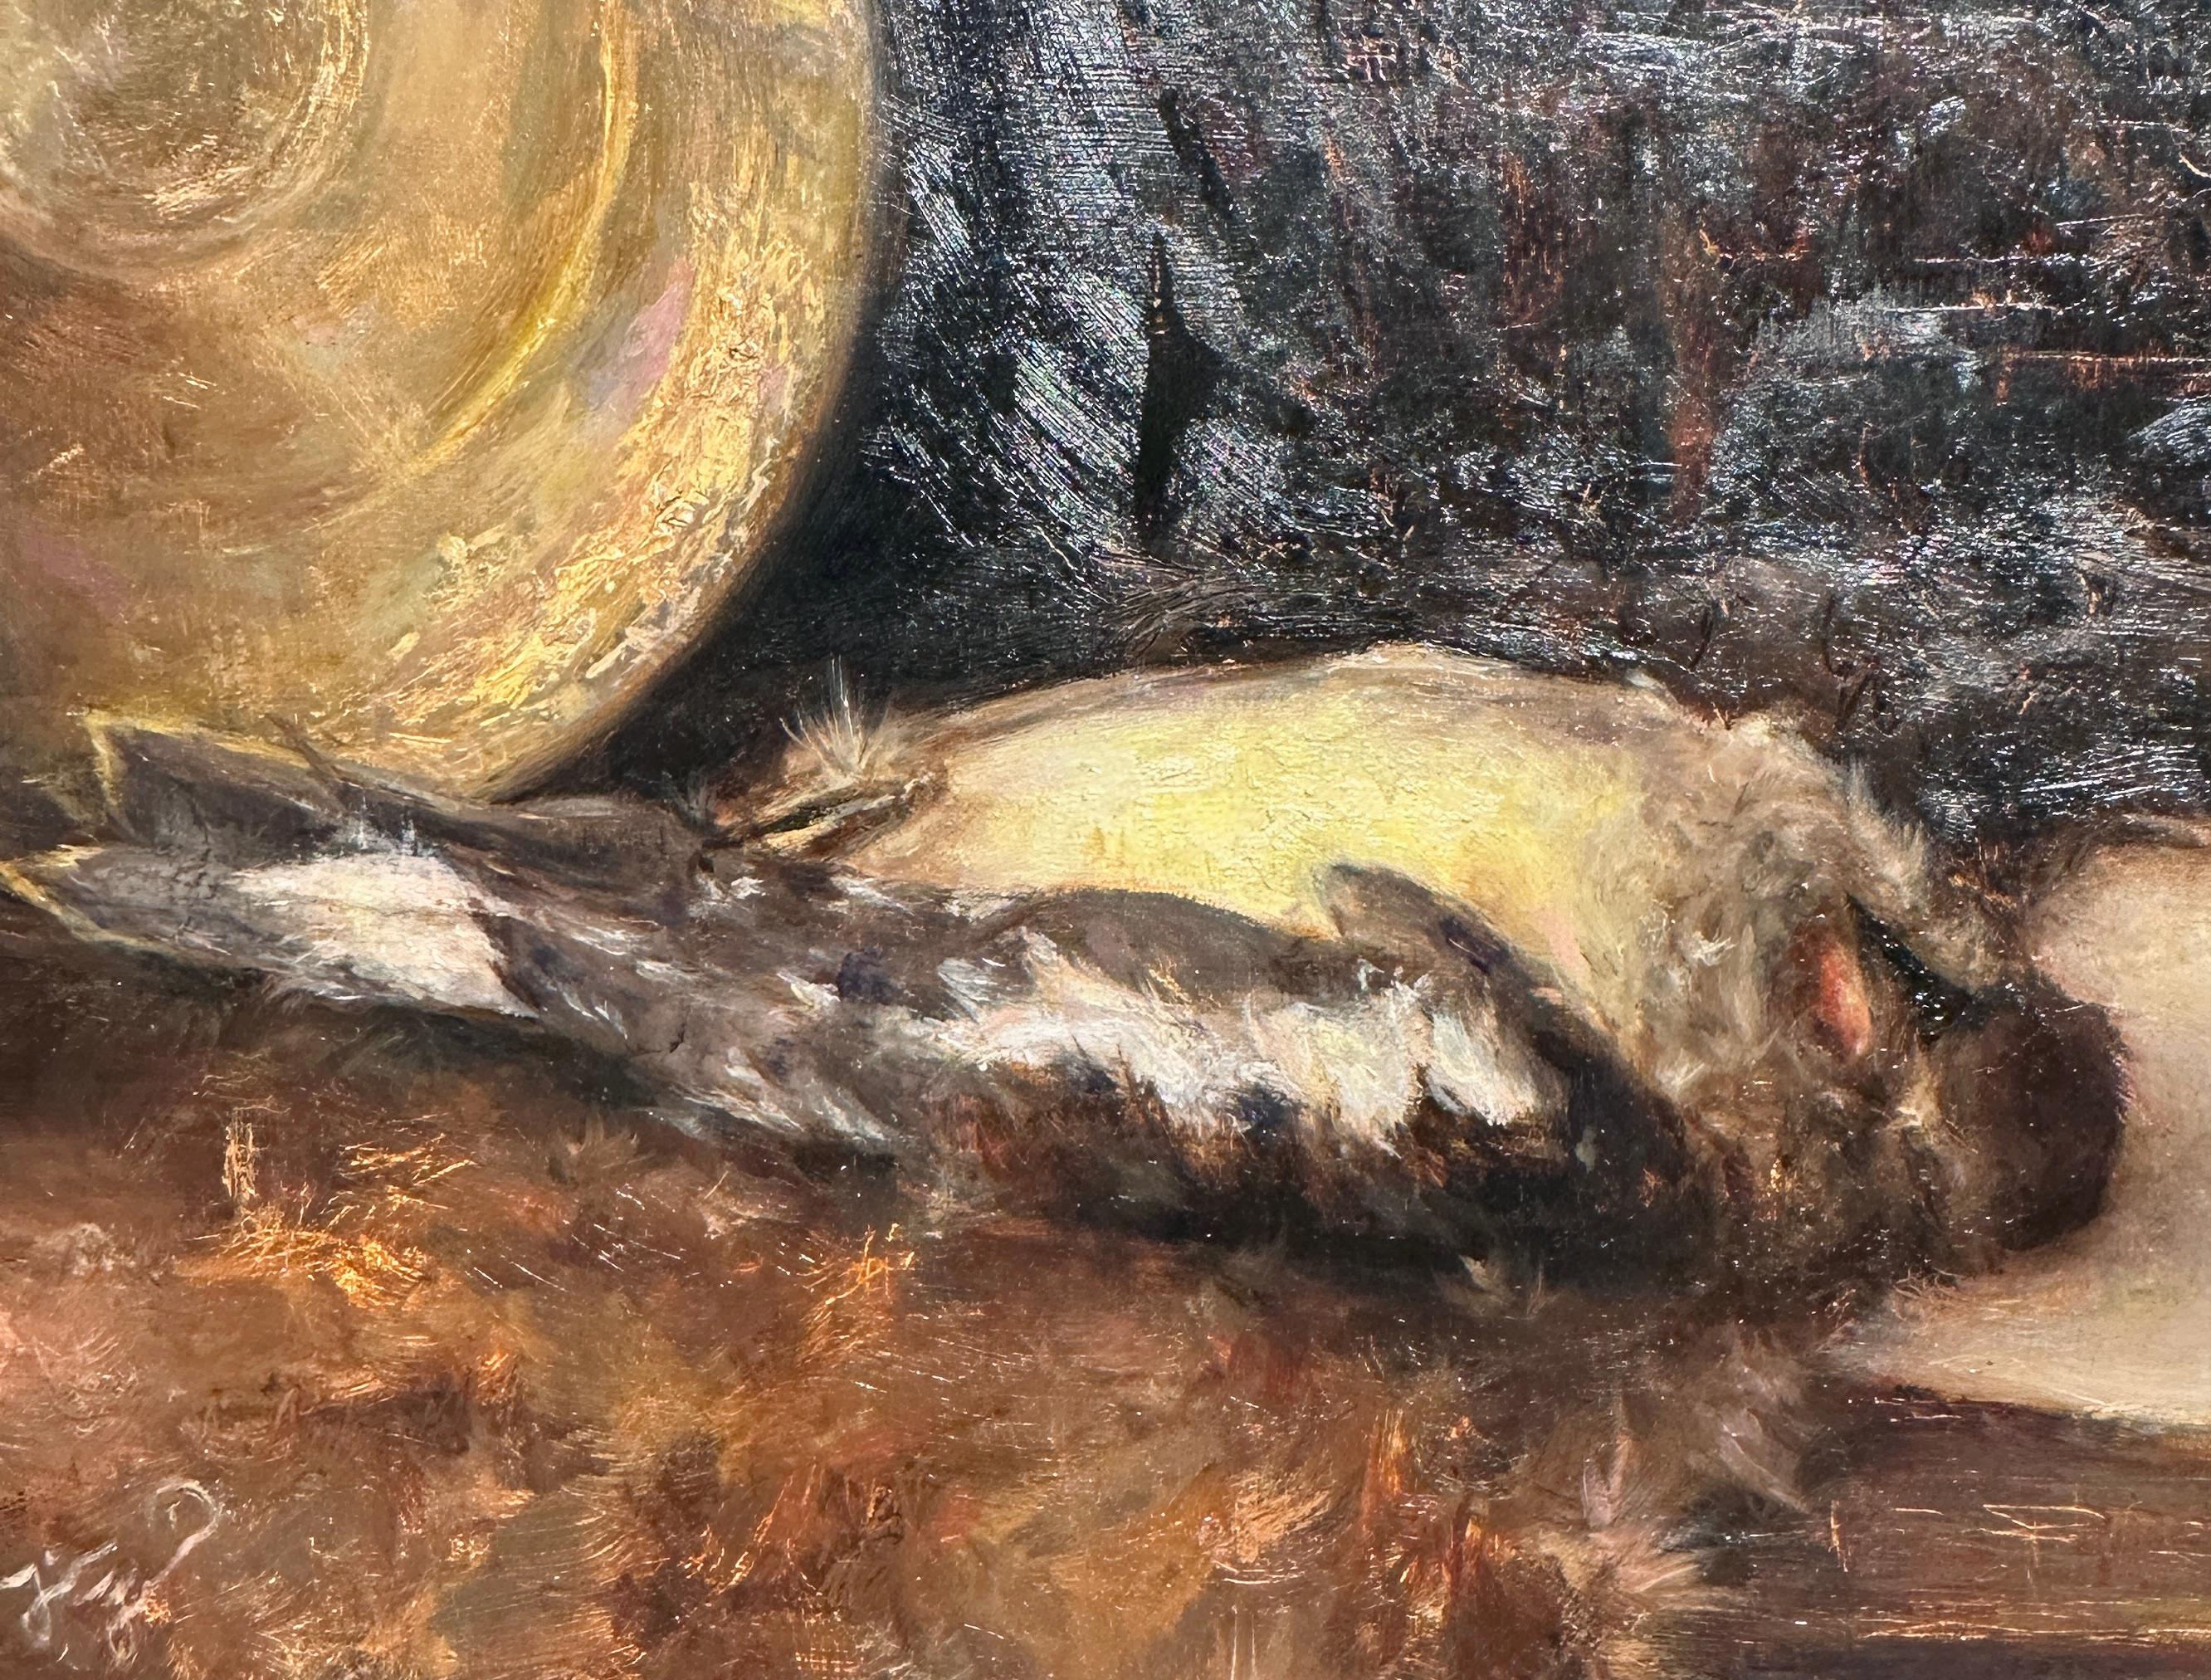 Laid to Rest - Still Life with Dead Bird and Golden Plate, Oil on Panel, Framed - Contemporary Painting by Tina Figarelli